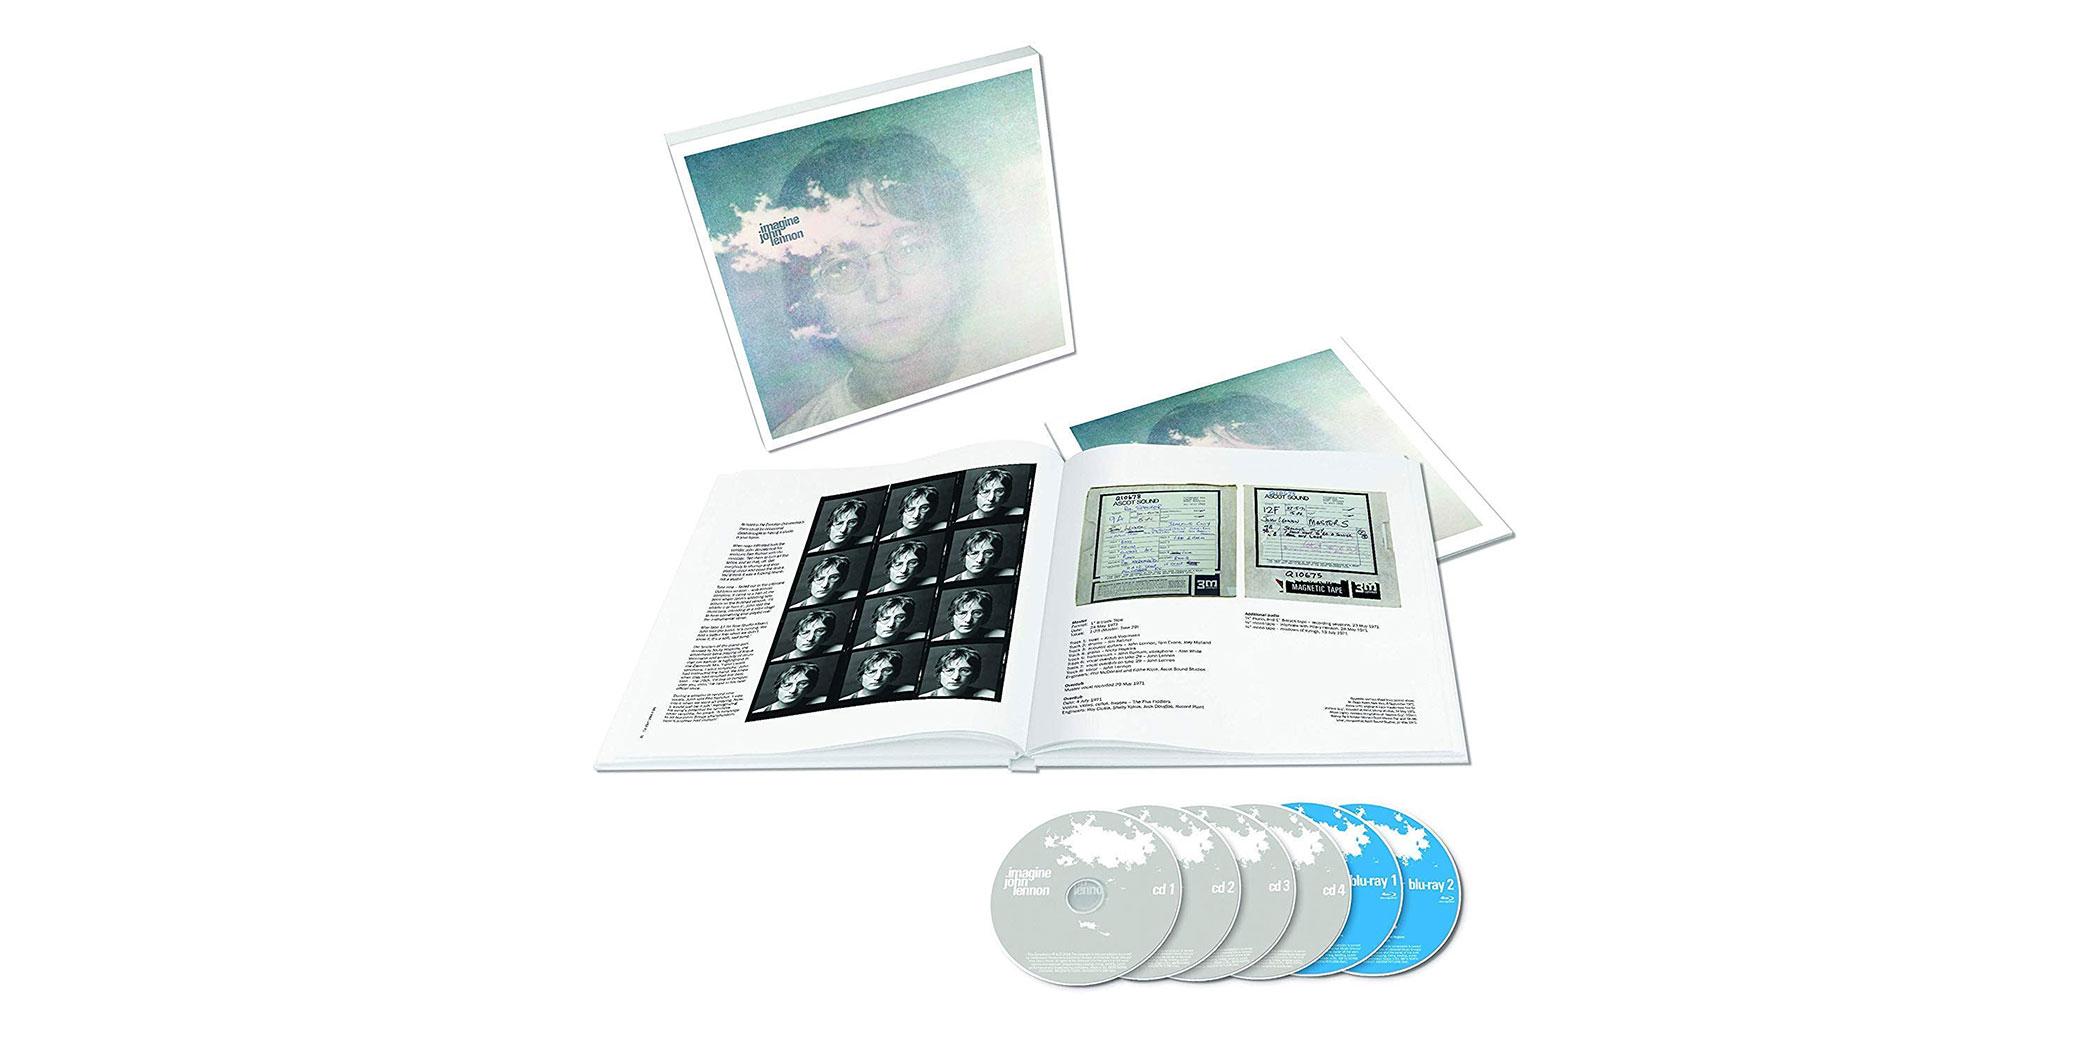 Imagine: The Ultimate Collection by John Lennon